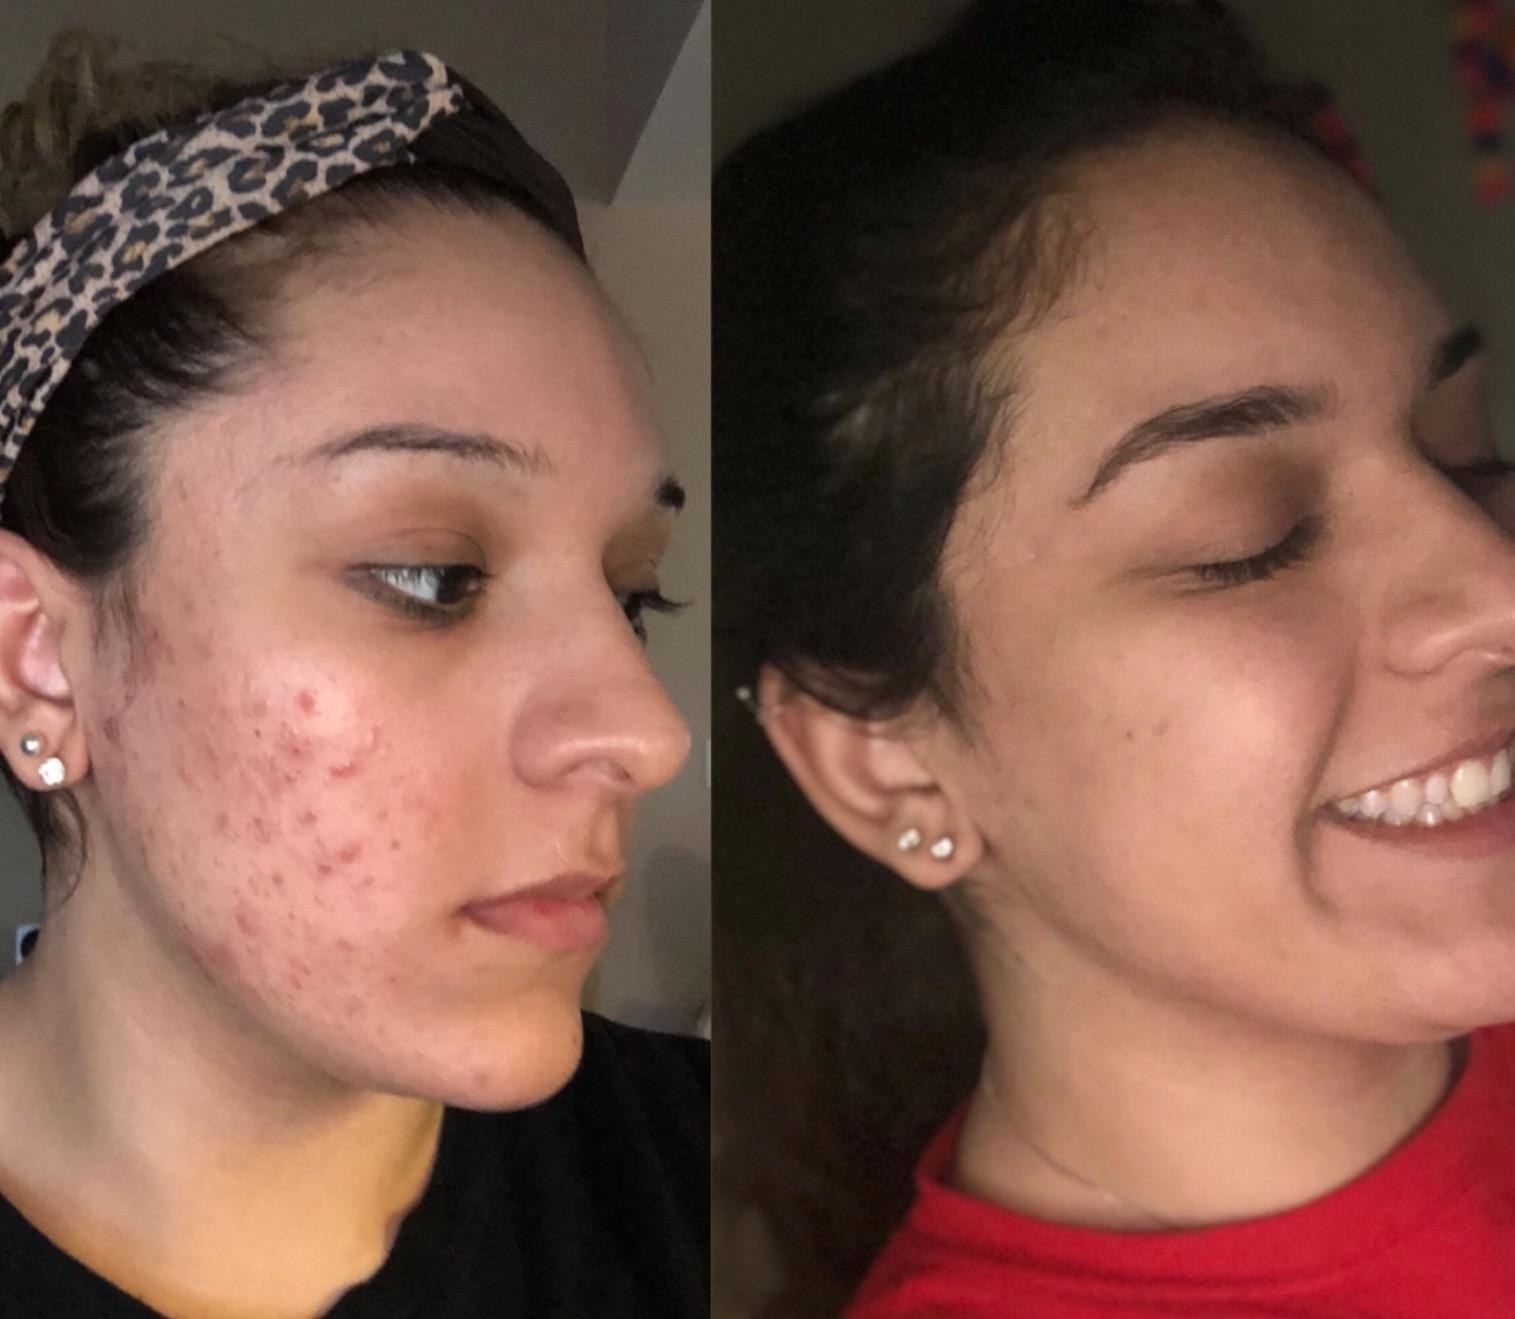 On the left, reviewer&#x27;s acne-covered cheek. On the right, reviewer&#x27;s clear, blemish-free skin